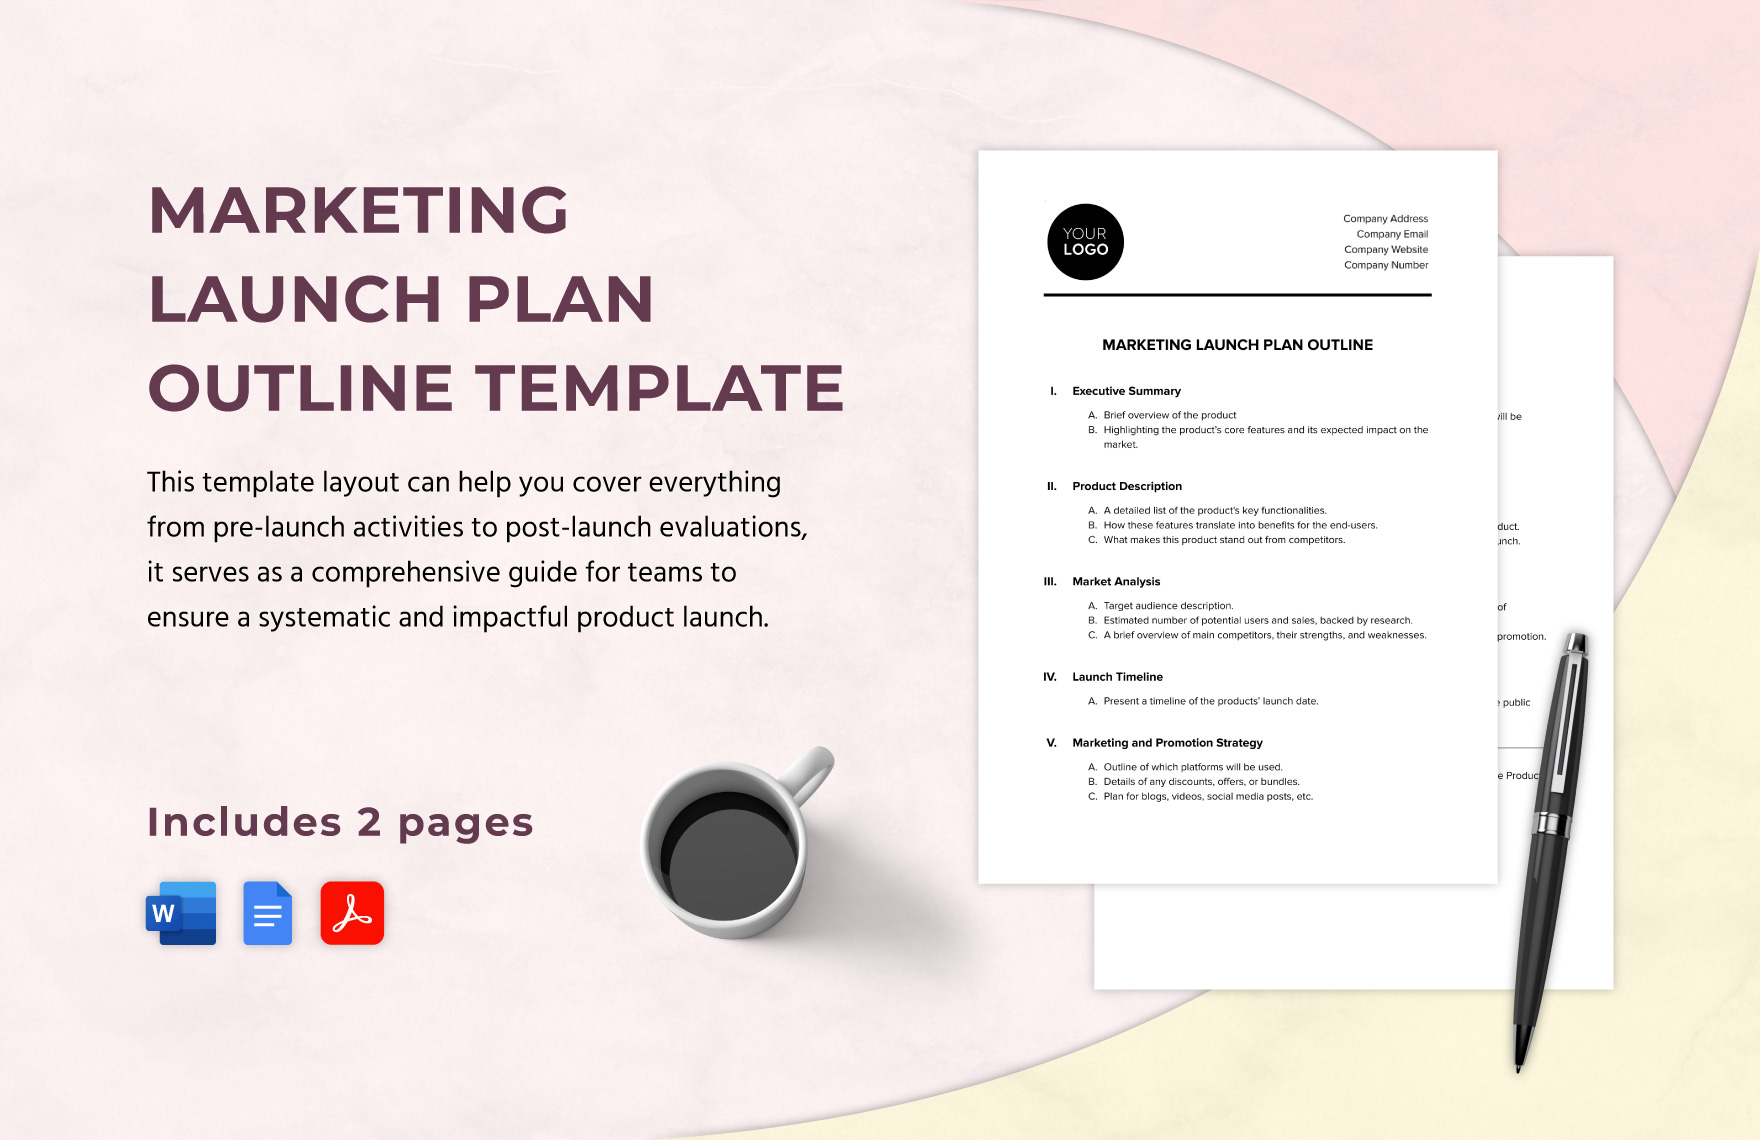 Marketing Launch Plan Outline Template in Word, Google Docs, PDF